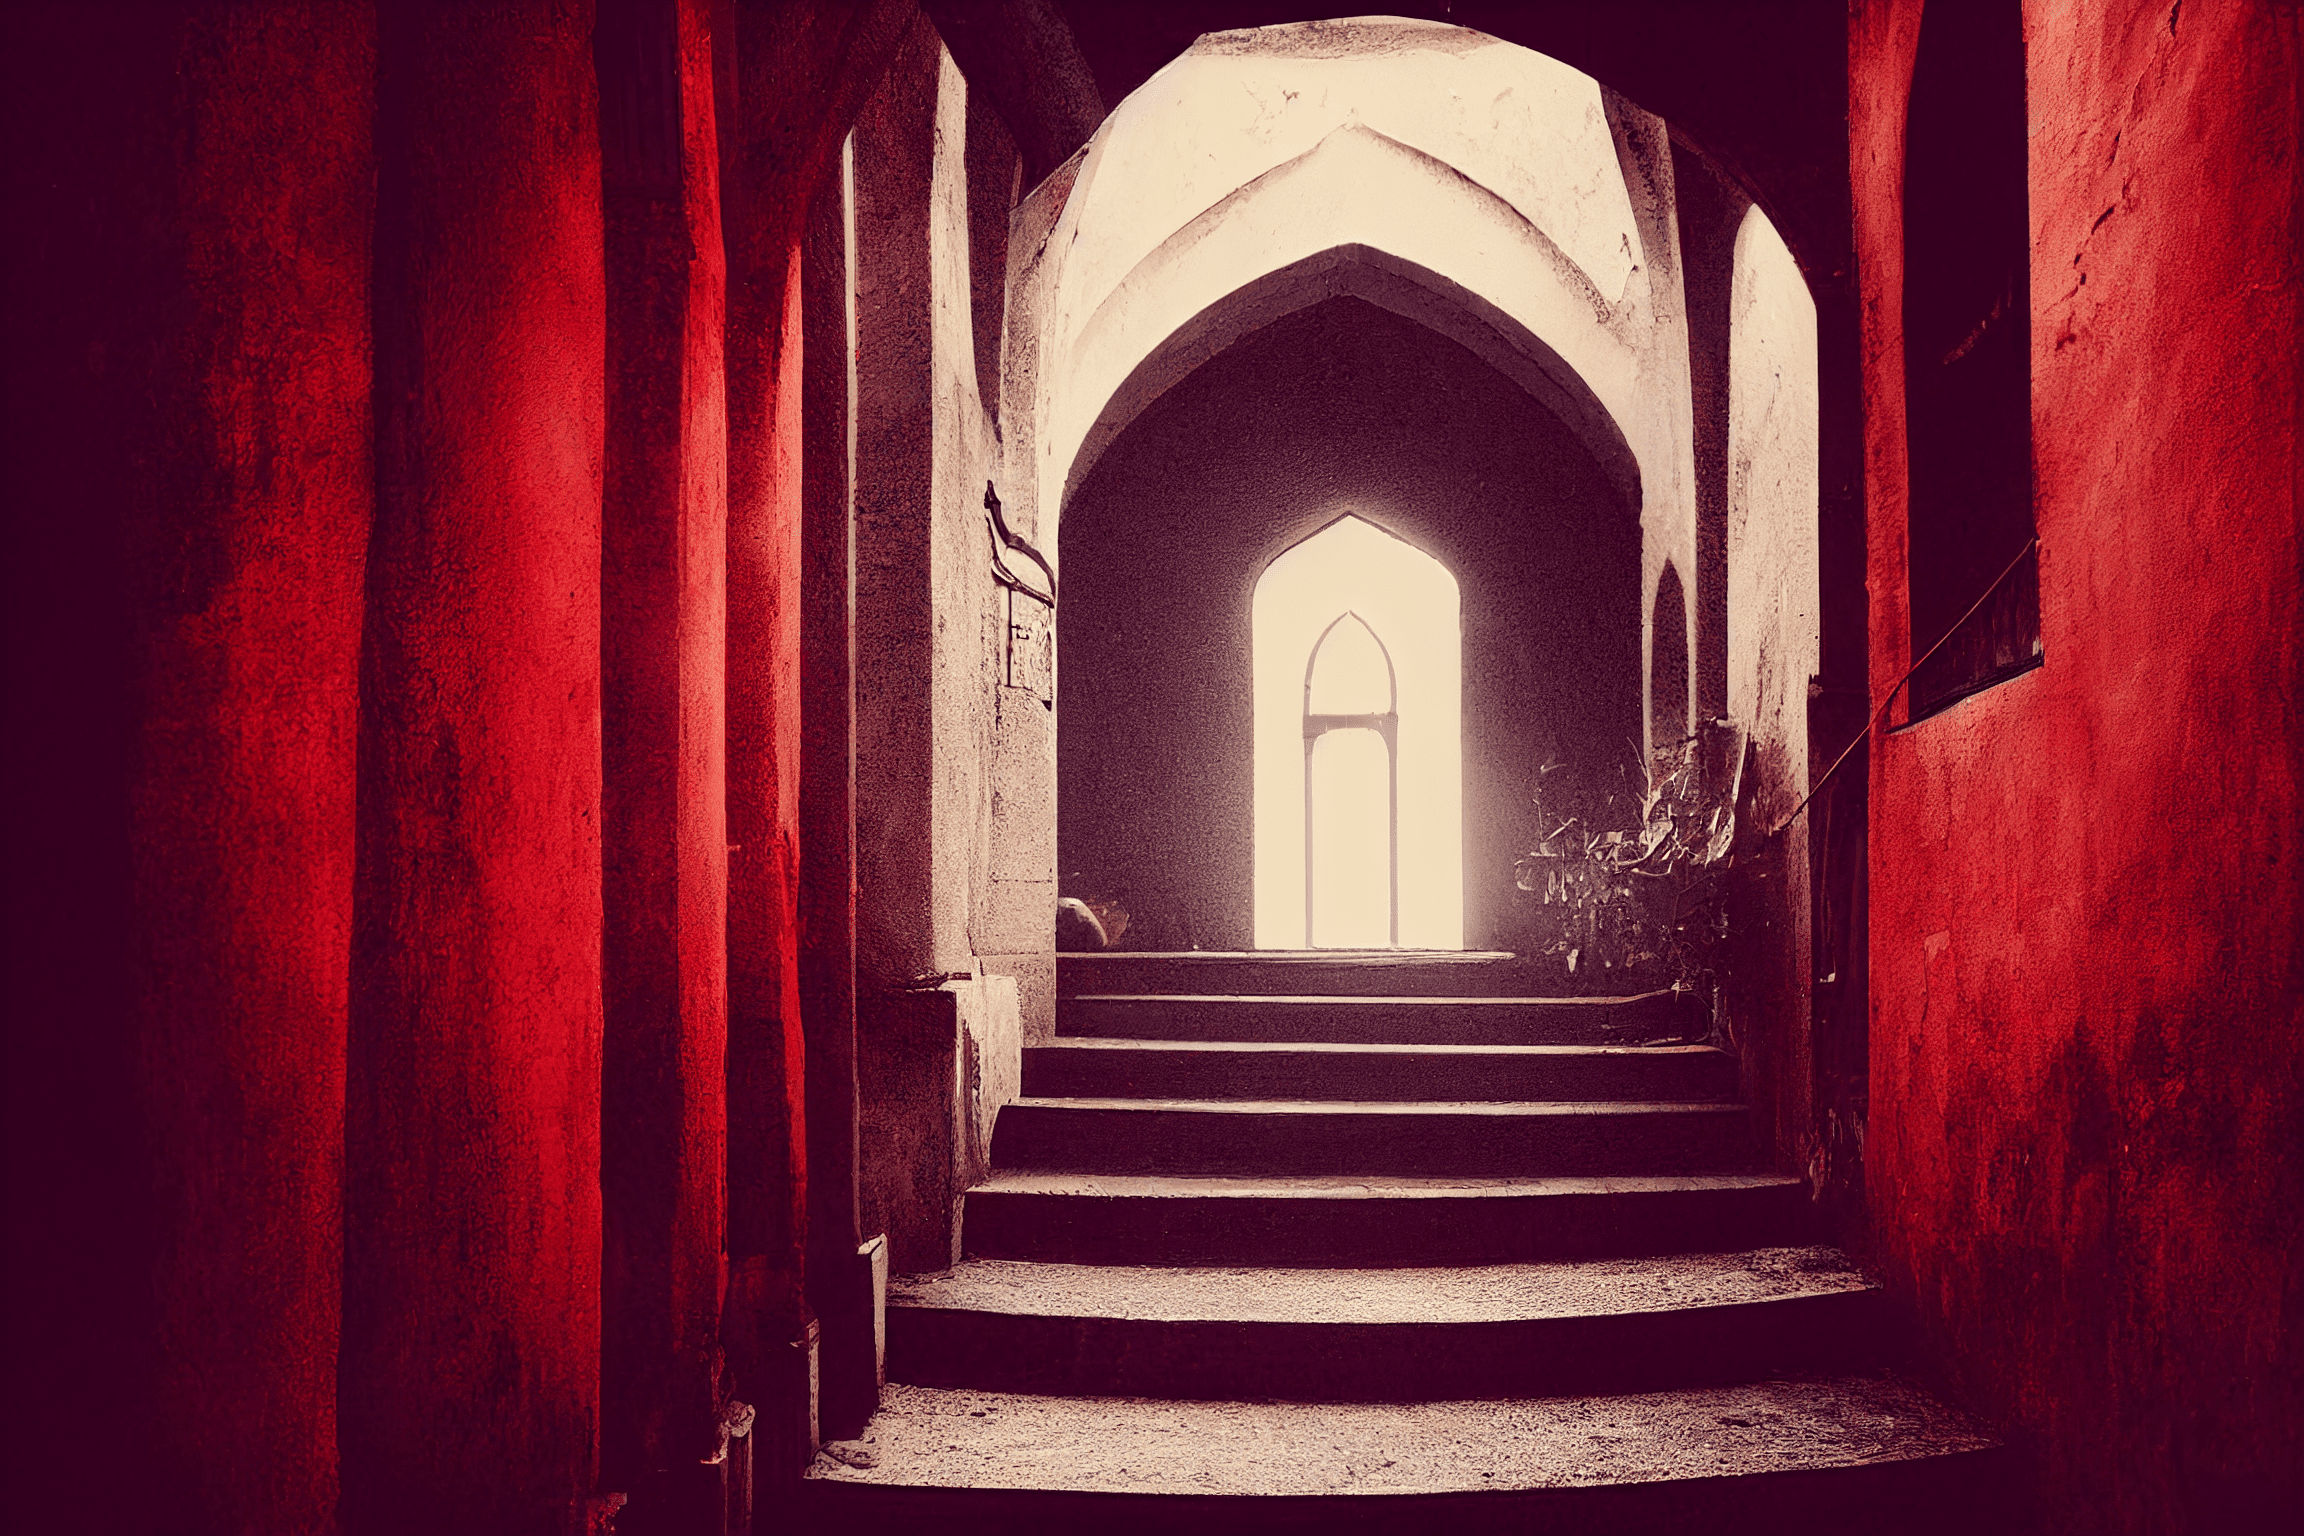 In a place I loved – red stairs